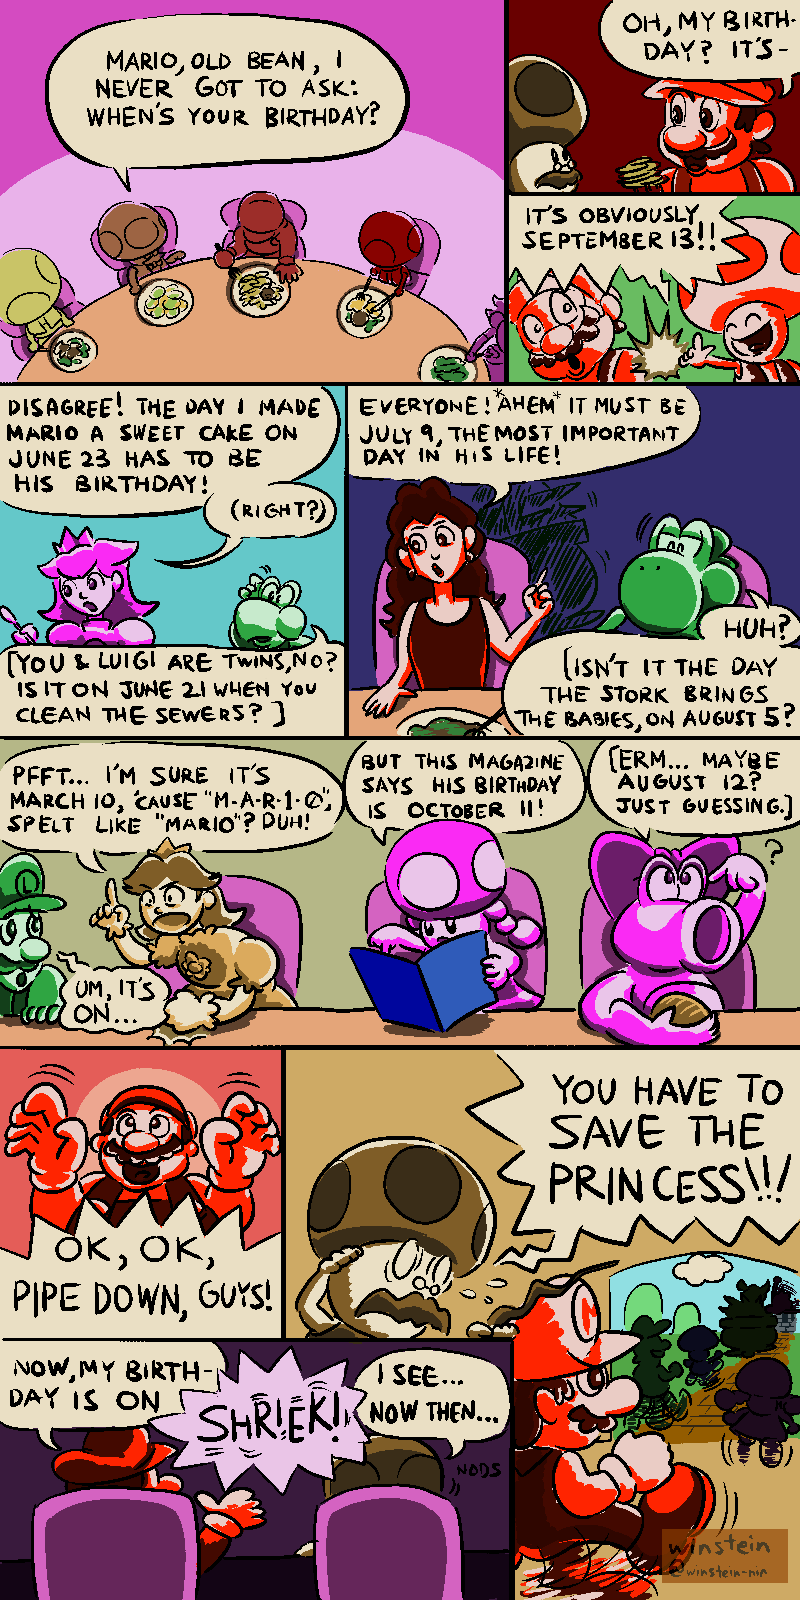 In a classic tale of parents claiming kids are delivered by storks, the  Mario Bros. didn't buy Papa Mario's tale. (Art by me) : r/Mario